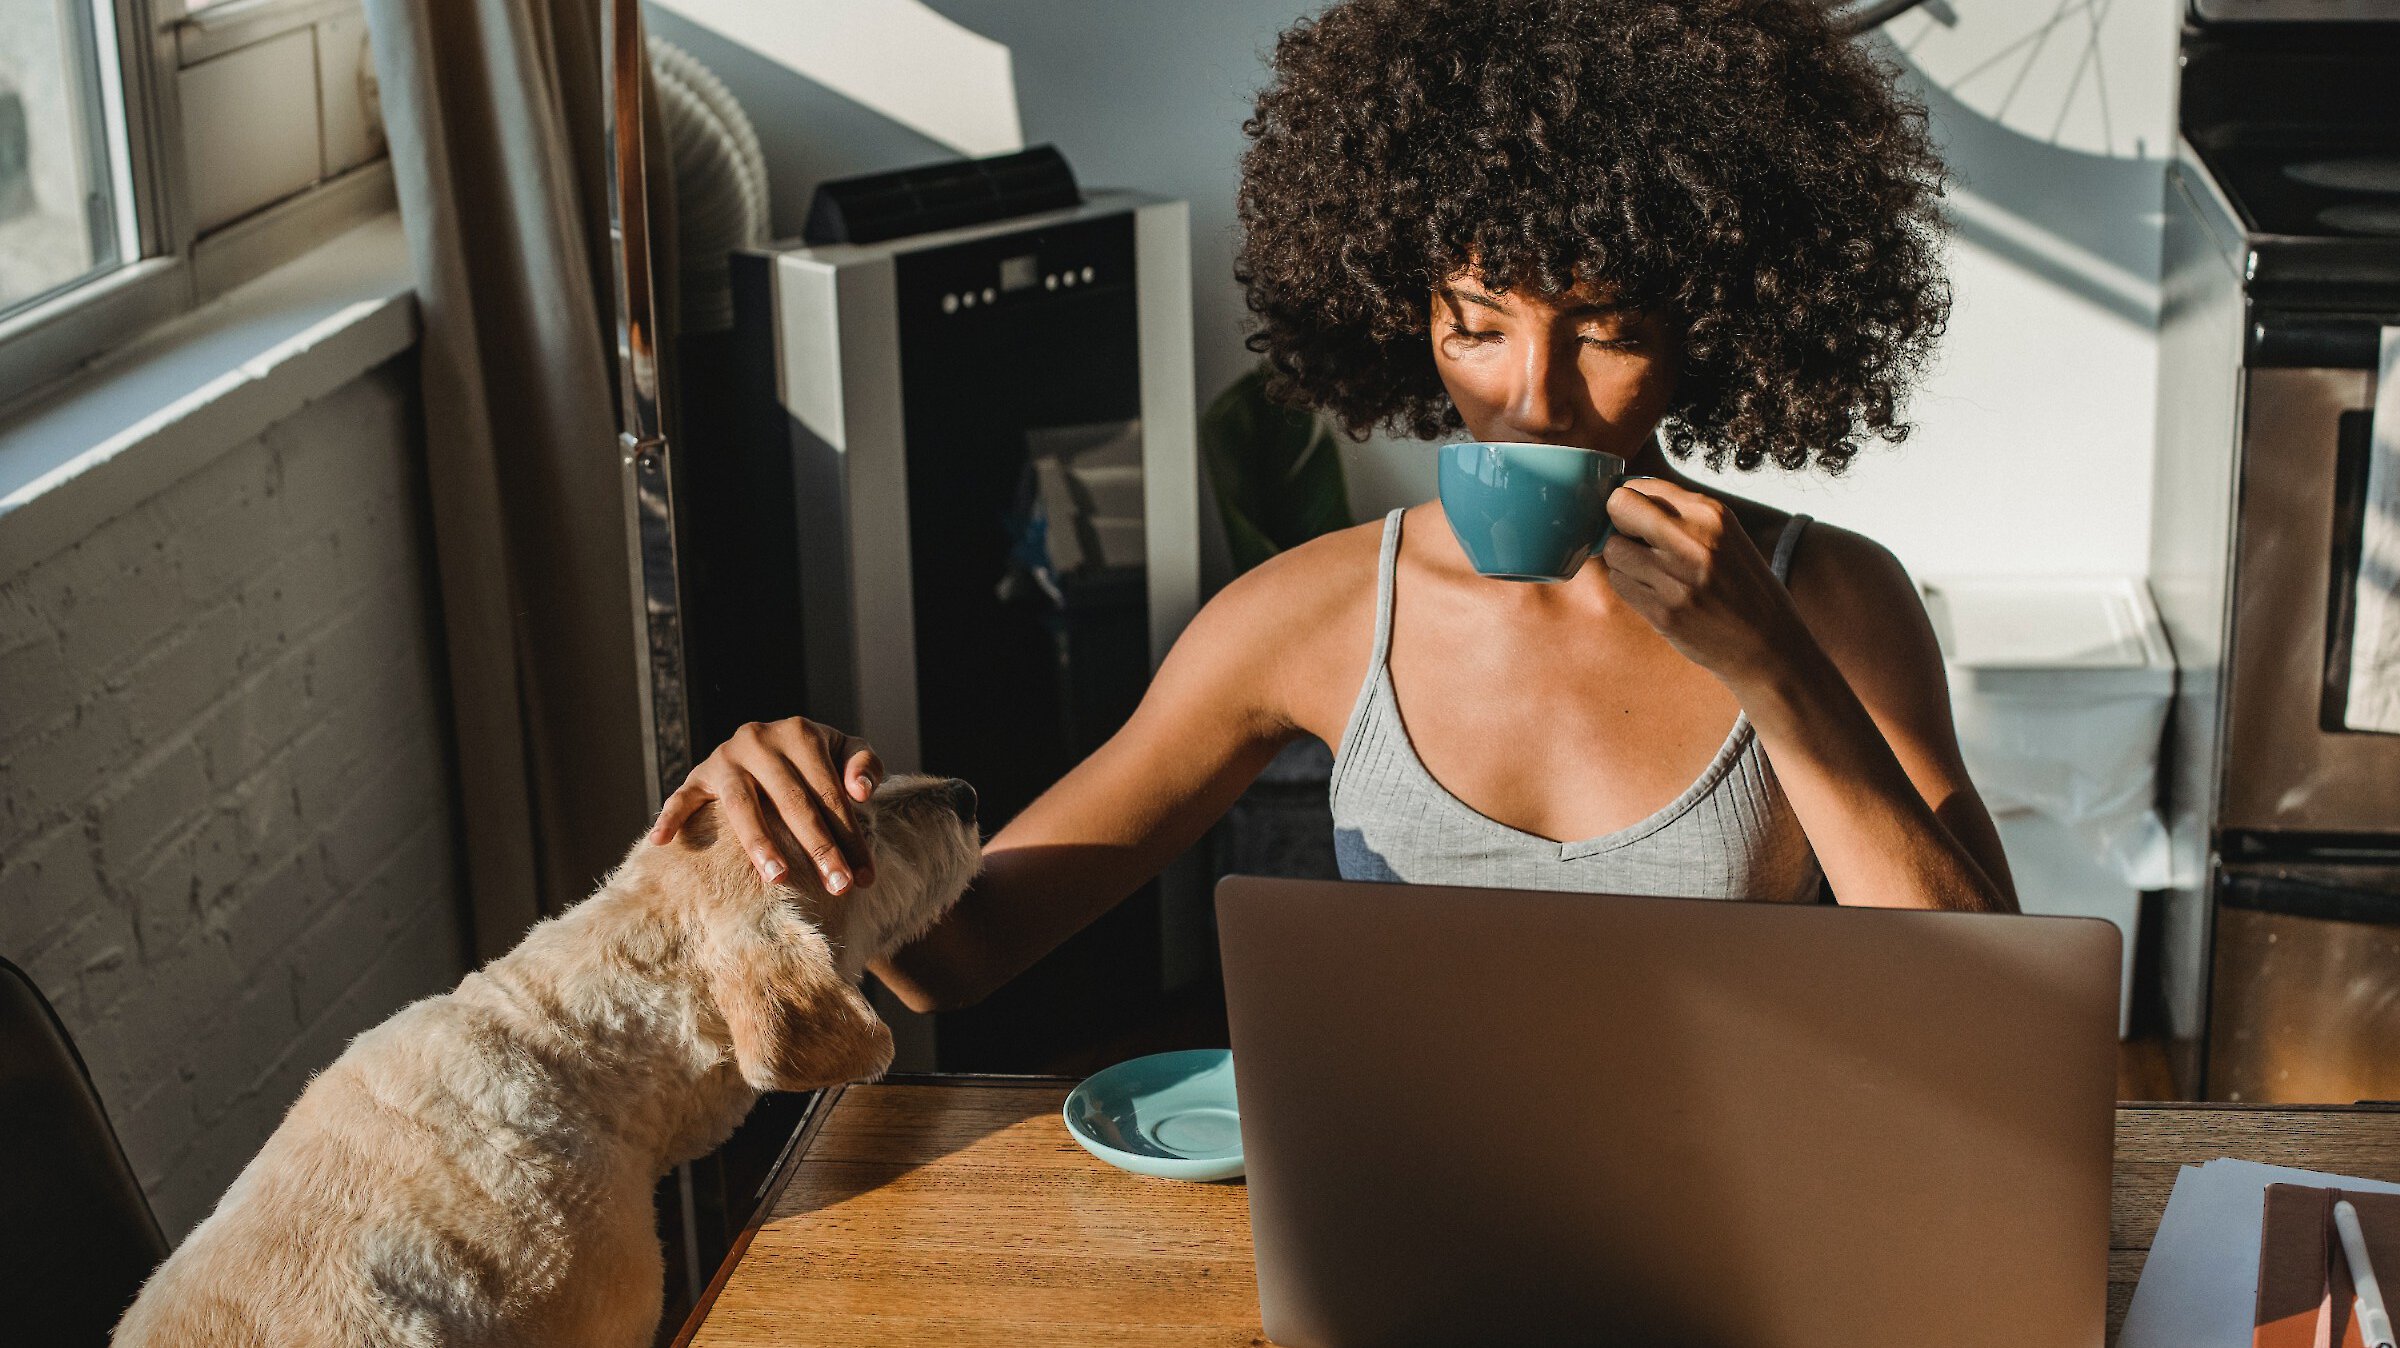 Woman drinking from a mug looking at her screen and petting dog at same time